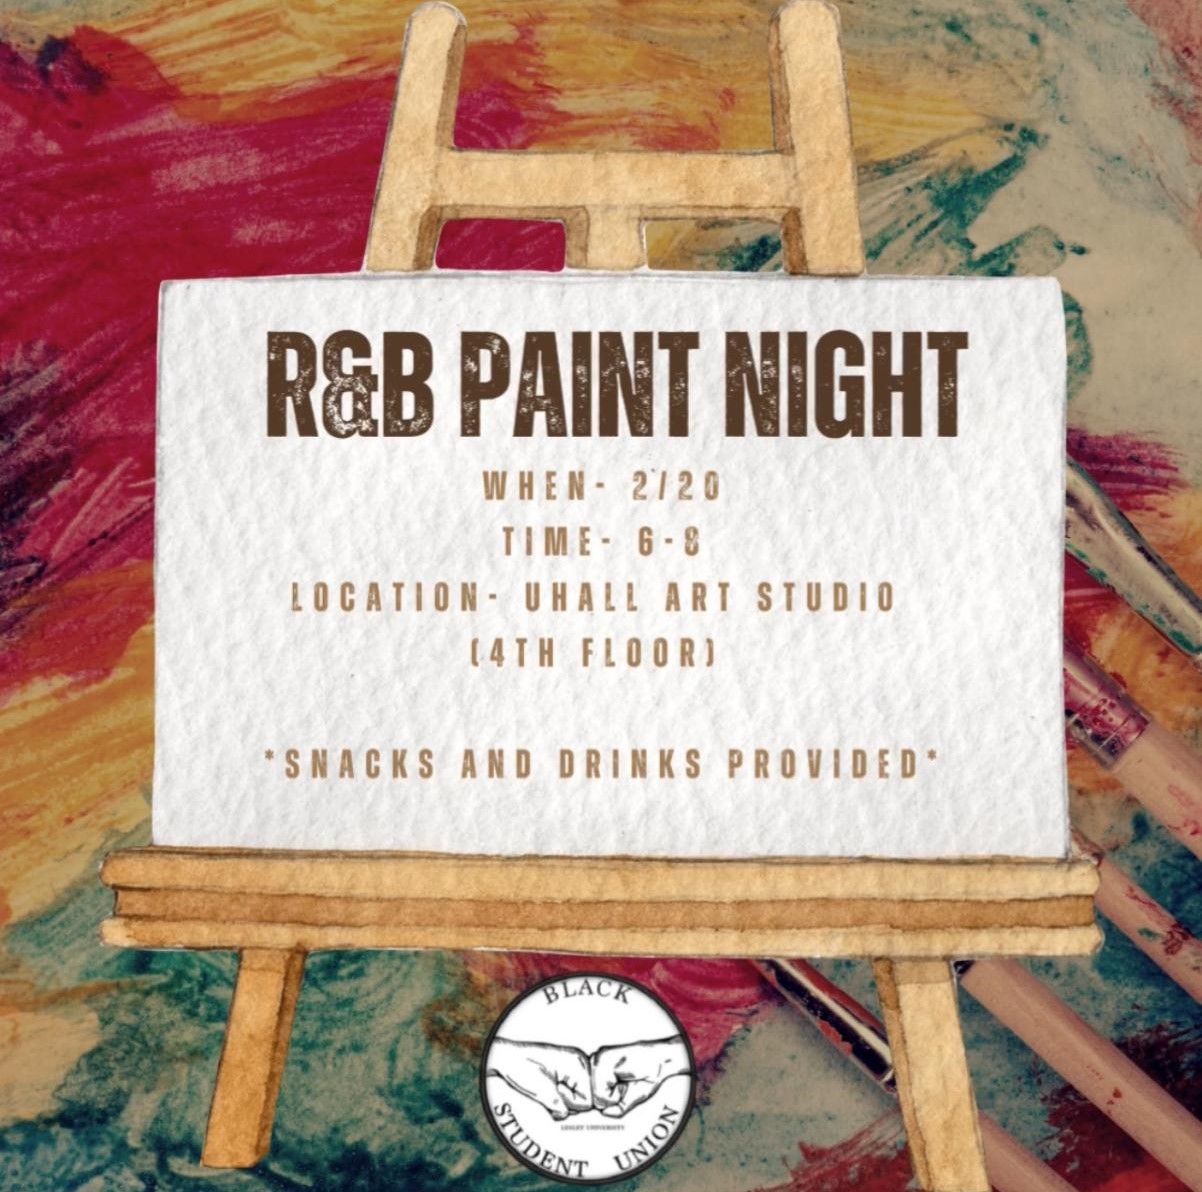 An image of a wooden easel with a sign that reads "R&B Paint Night" with a background of colorful paint splashes.